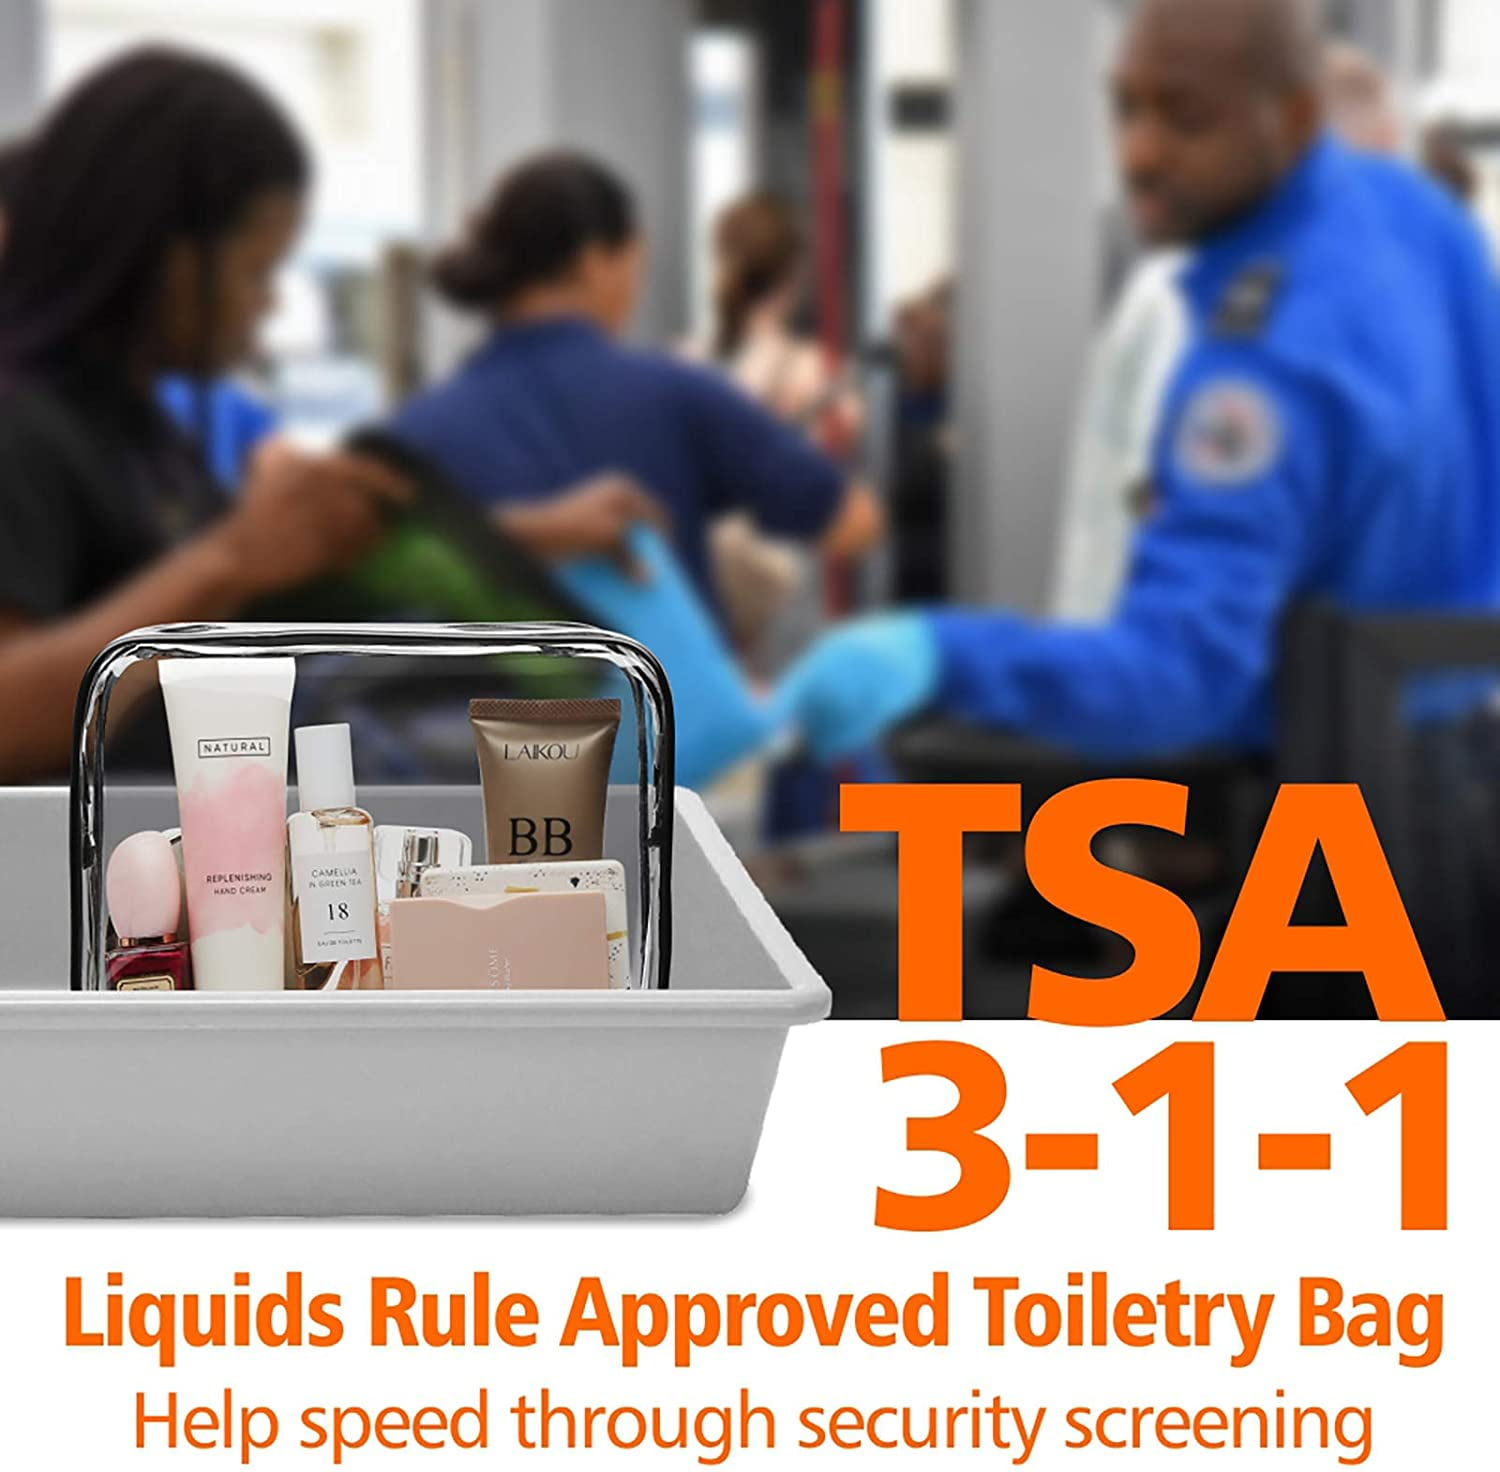 Cableinth TSA Approved Clear Travel Toiletry Bag-Quart Sized with  Zipper-Airport Airline Compliant Bag/Bottles-Men's/Women's 3-1-1 Kit+Travel  (1